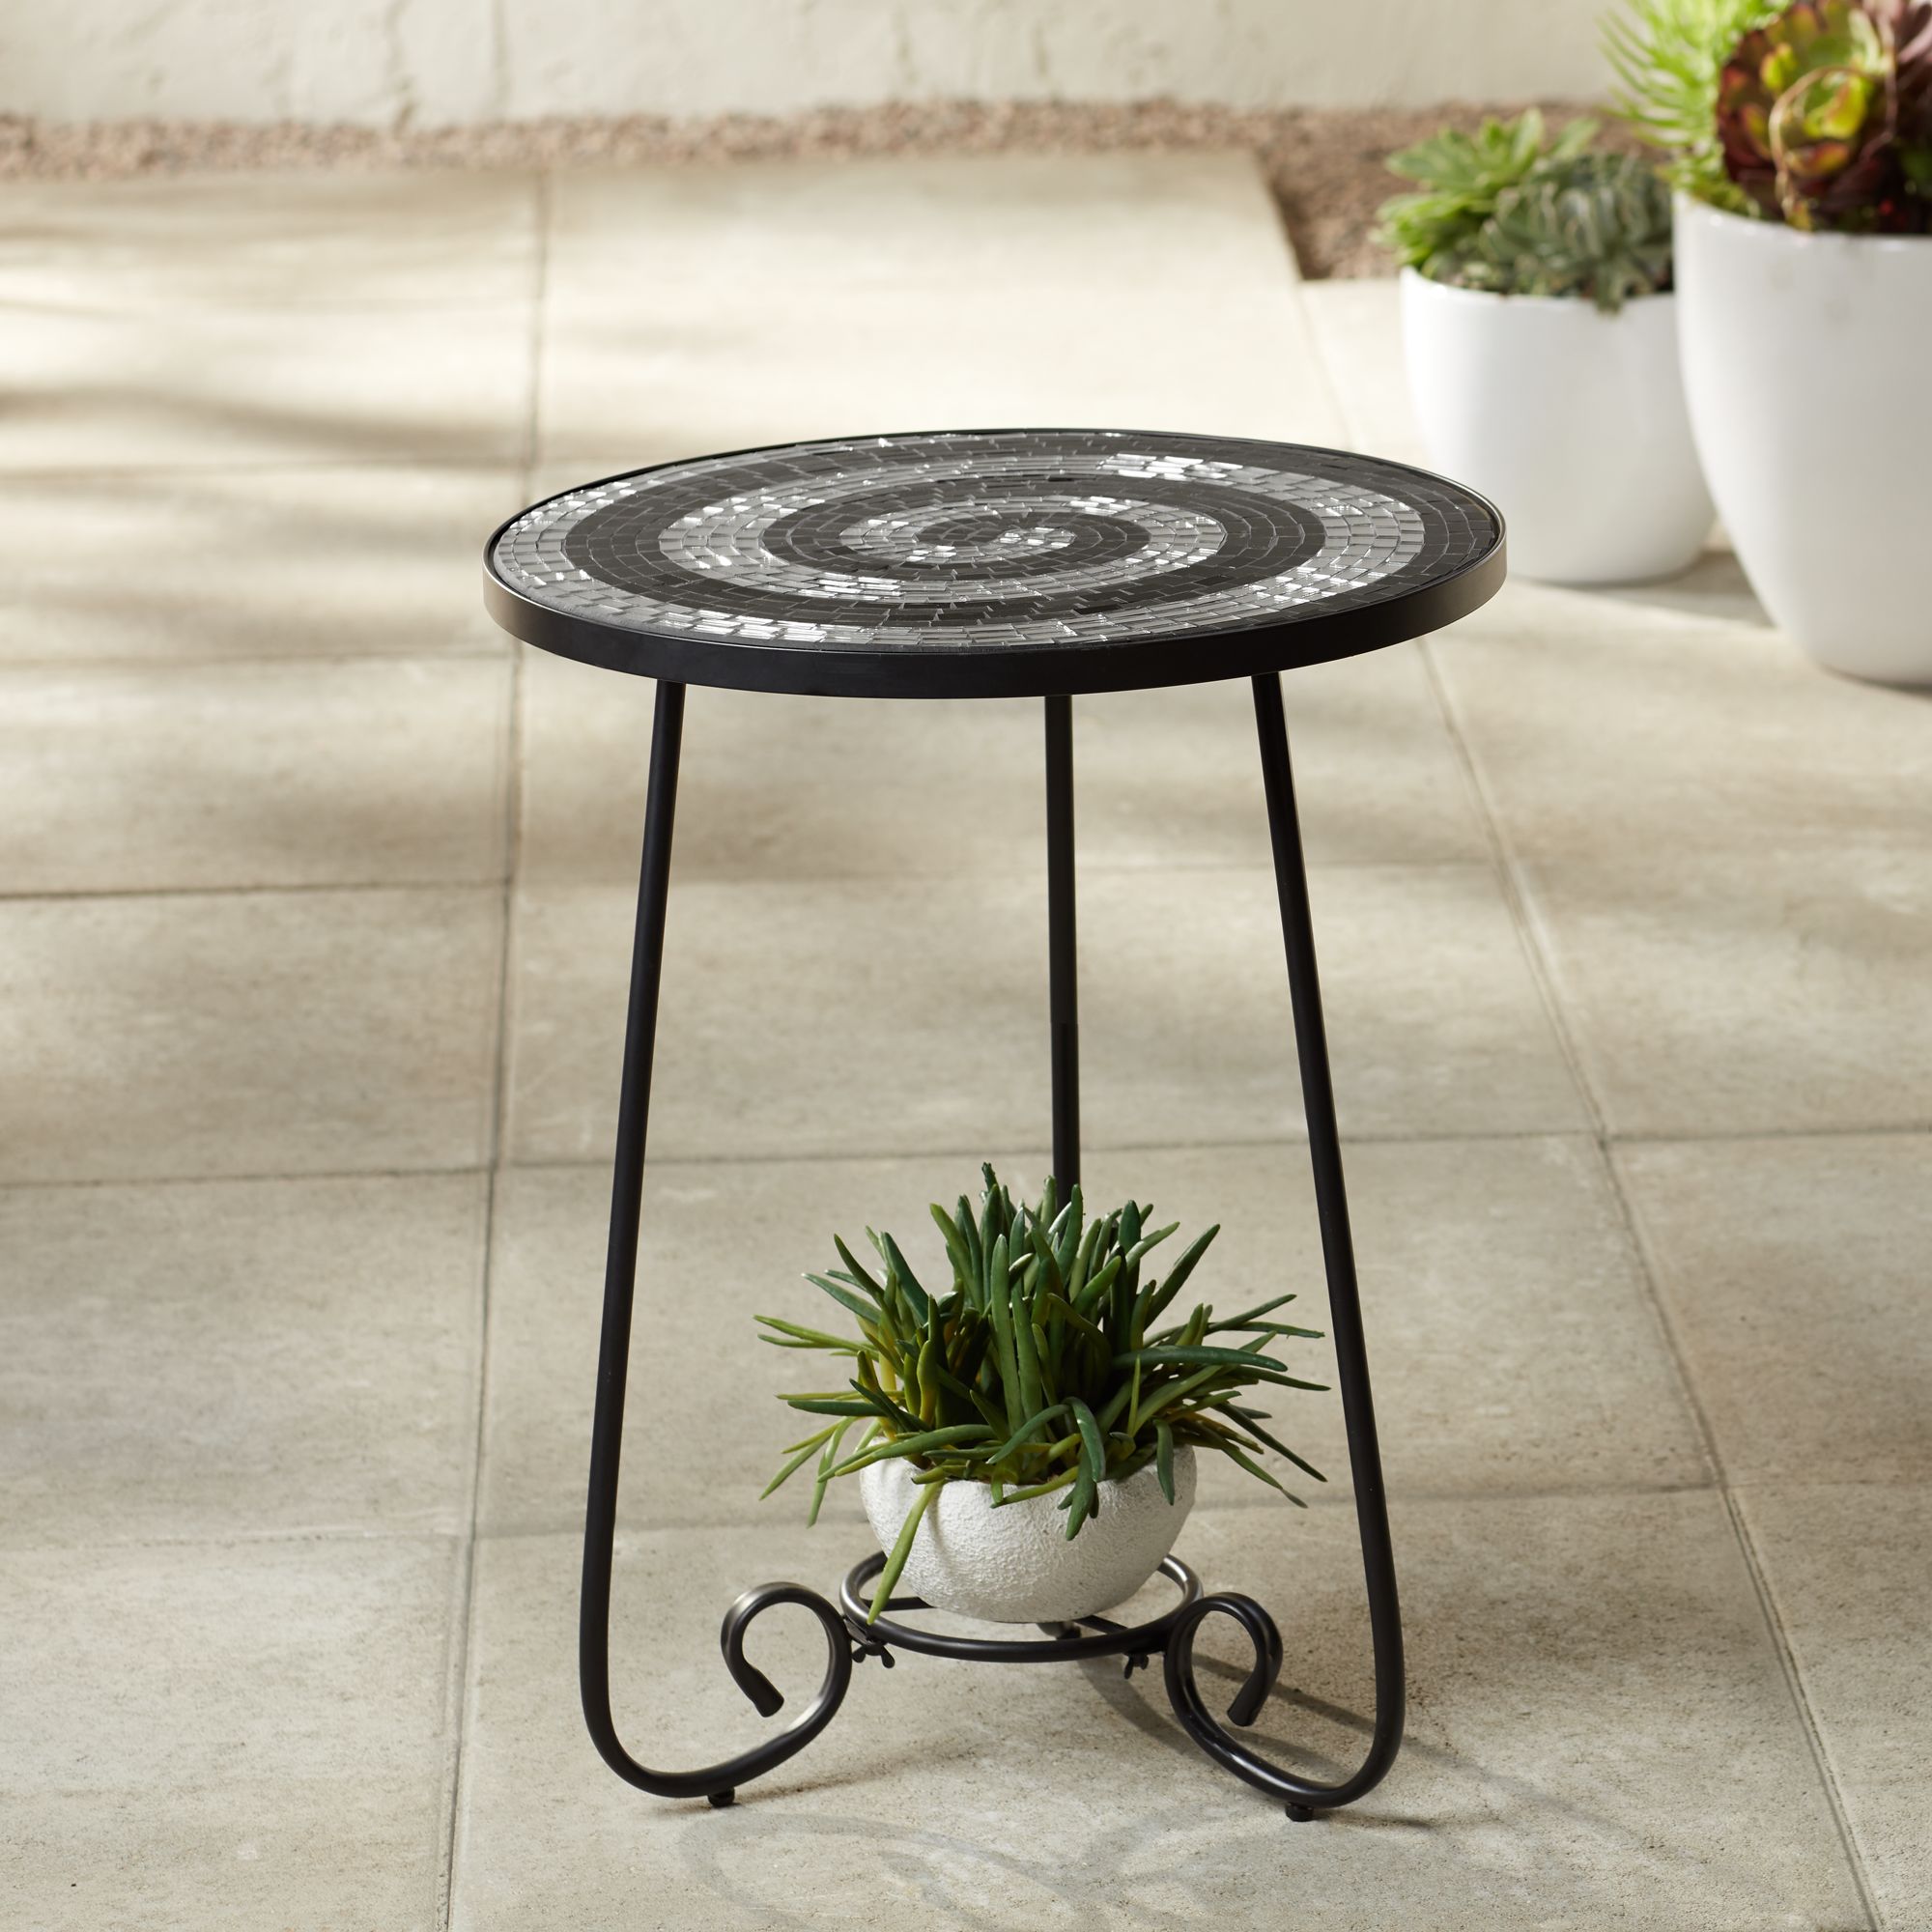 Teal Island Designs Modern Black Round Outdoor Accent Side Table 17 3/4" Wide Black White Tile Mosaic Tabletop Front Porch Patio Home House - image 1 of 8